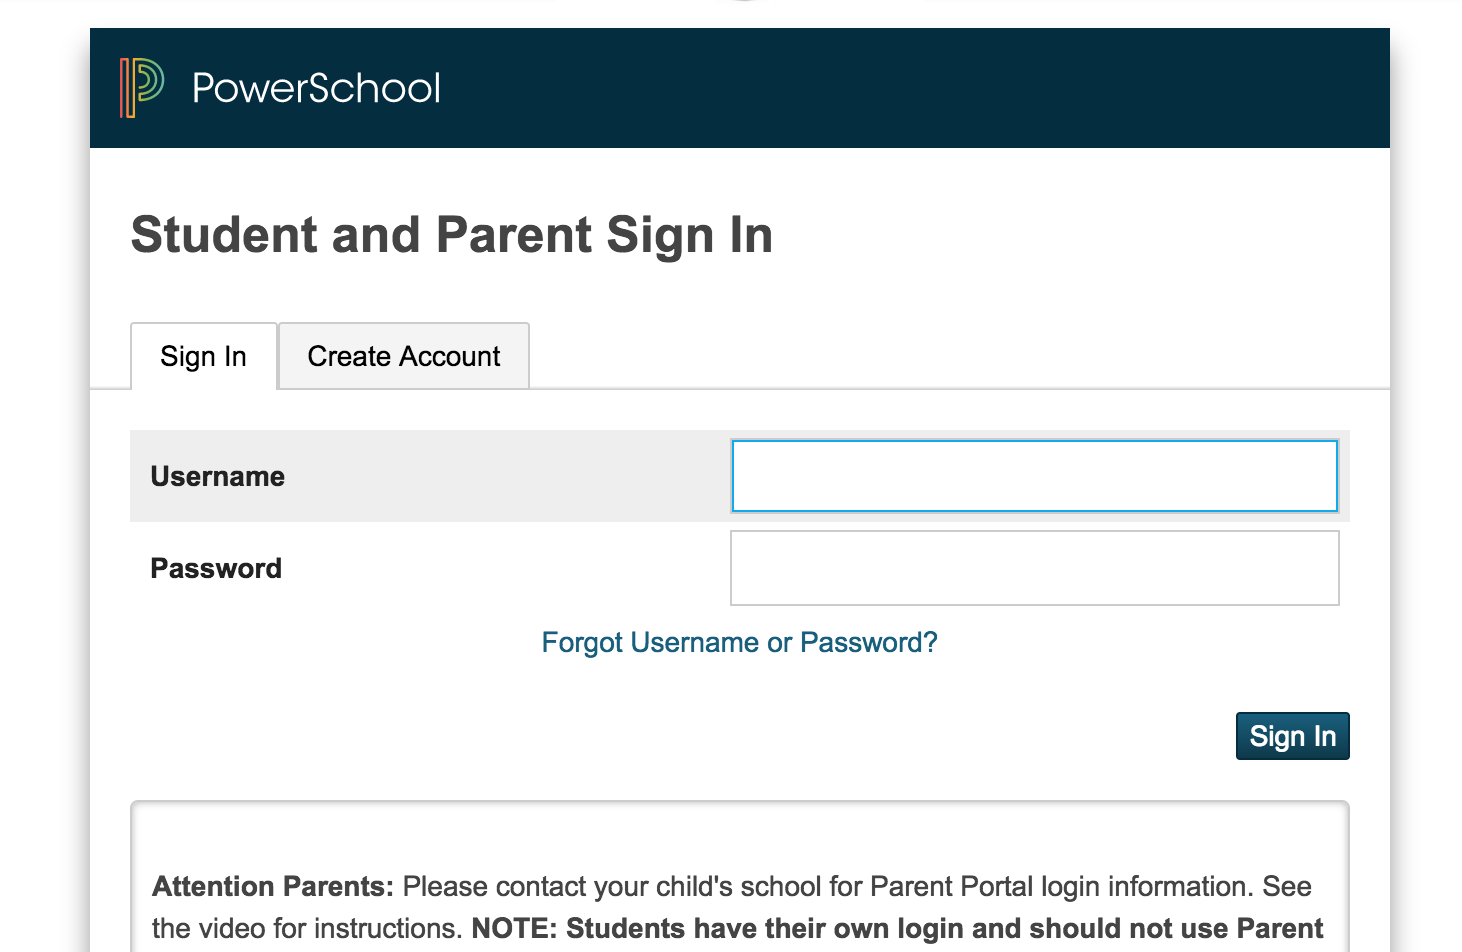 How to Log In to the Student Portal - McSweeney's Internet Tendency